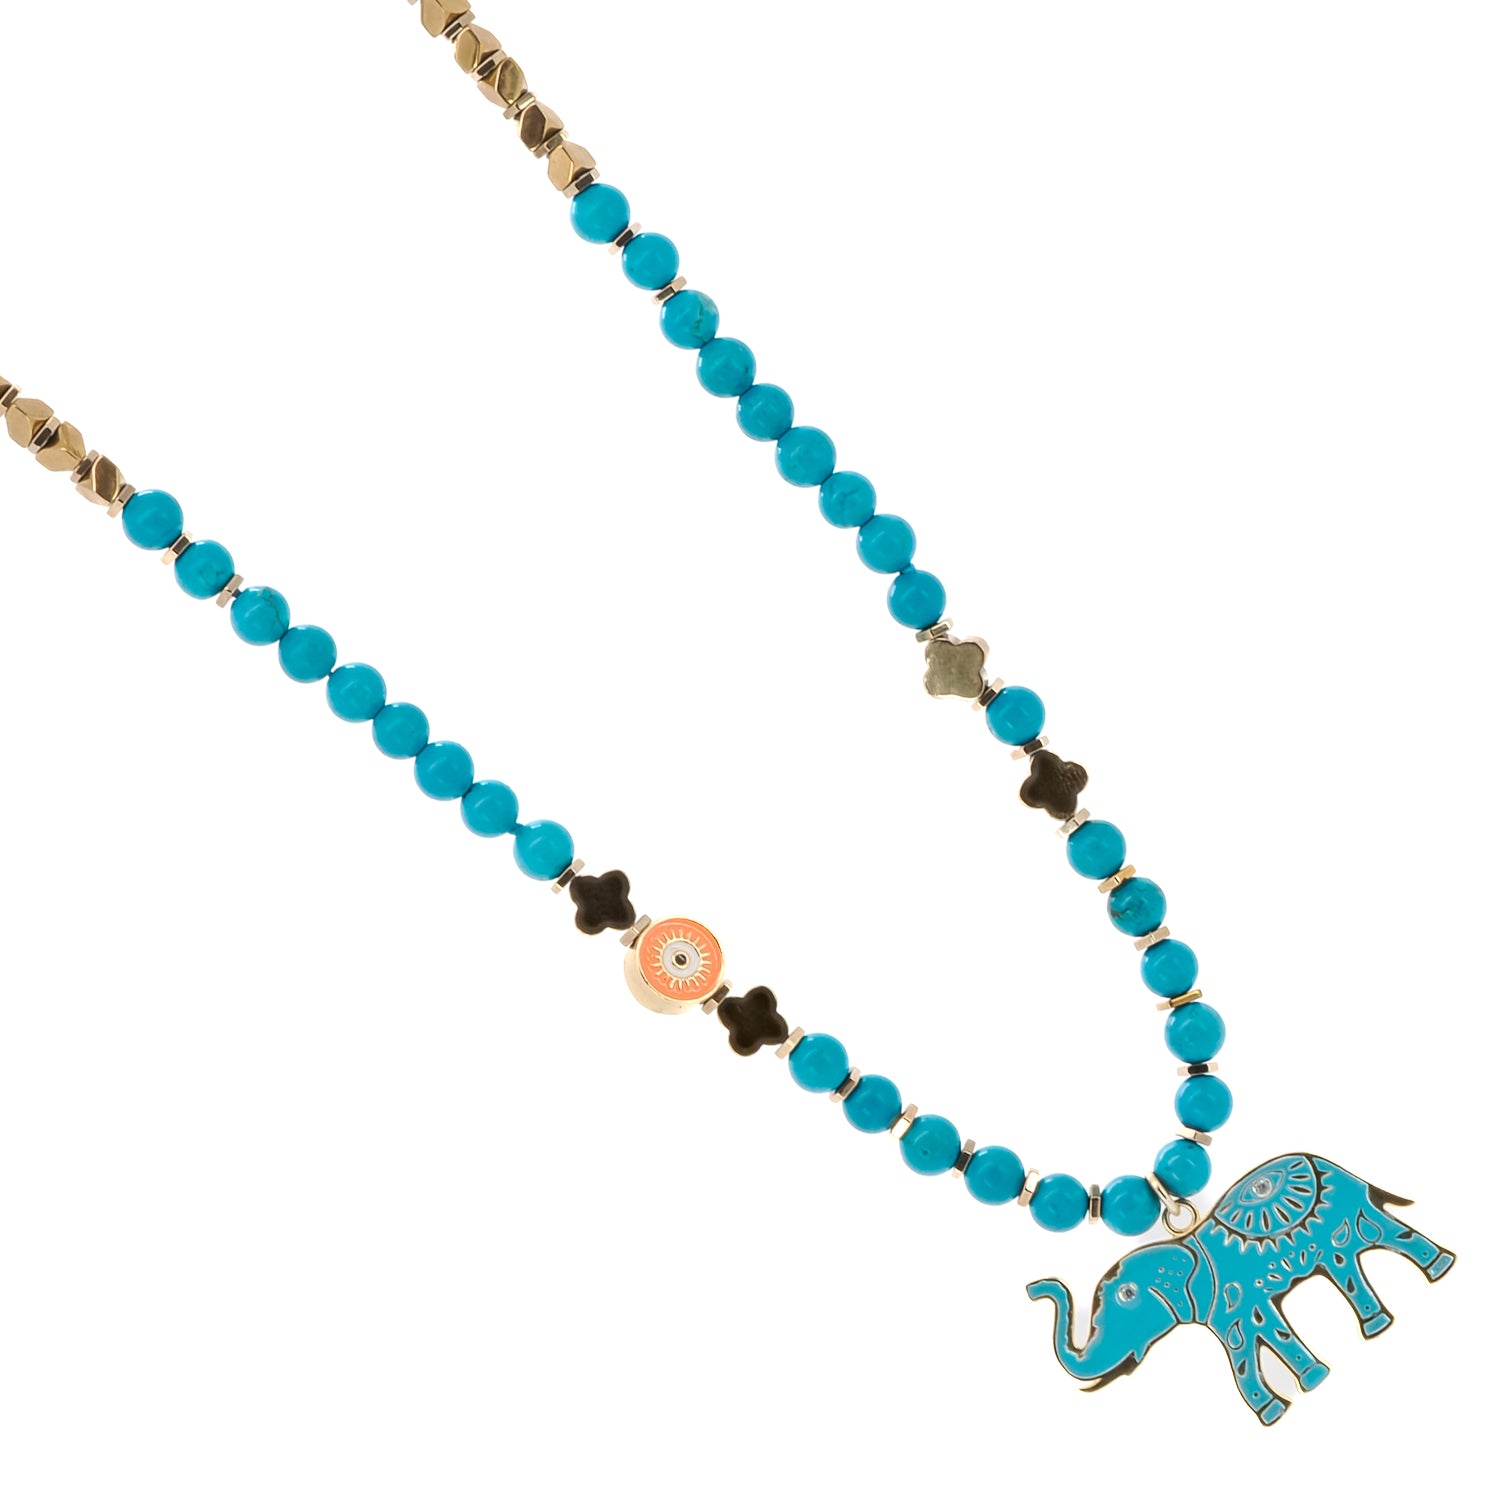 The 18K gold plated evil eye accent bead adding a touch of protection to the Turquoise Blue Elephant Necklace